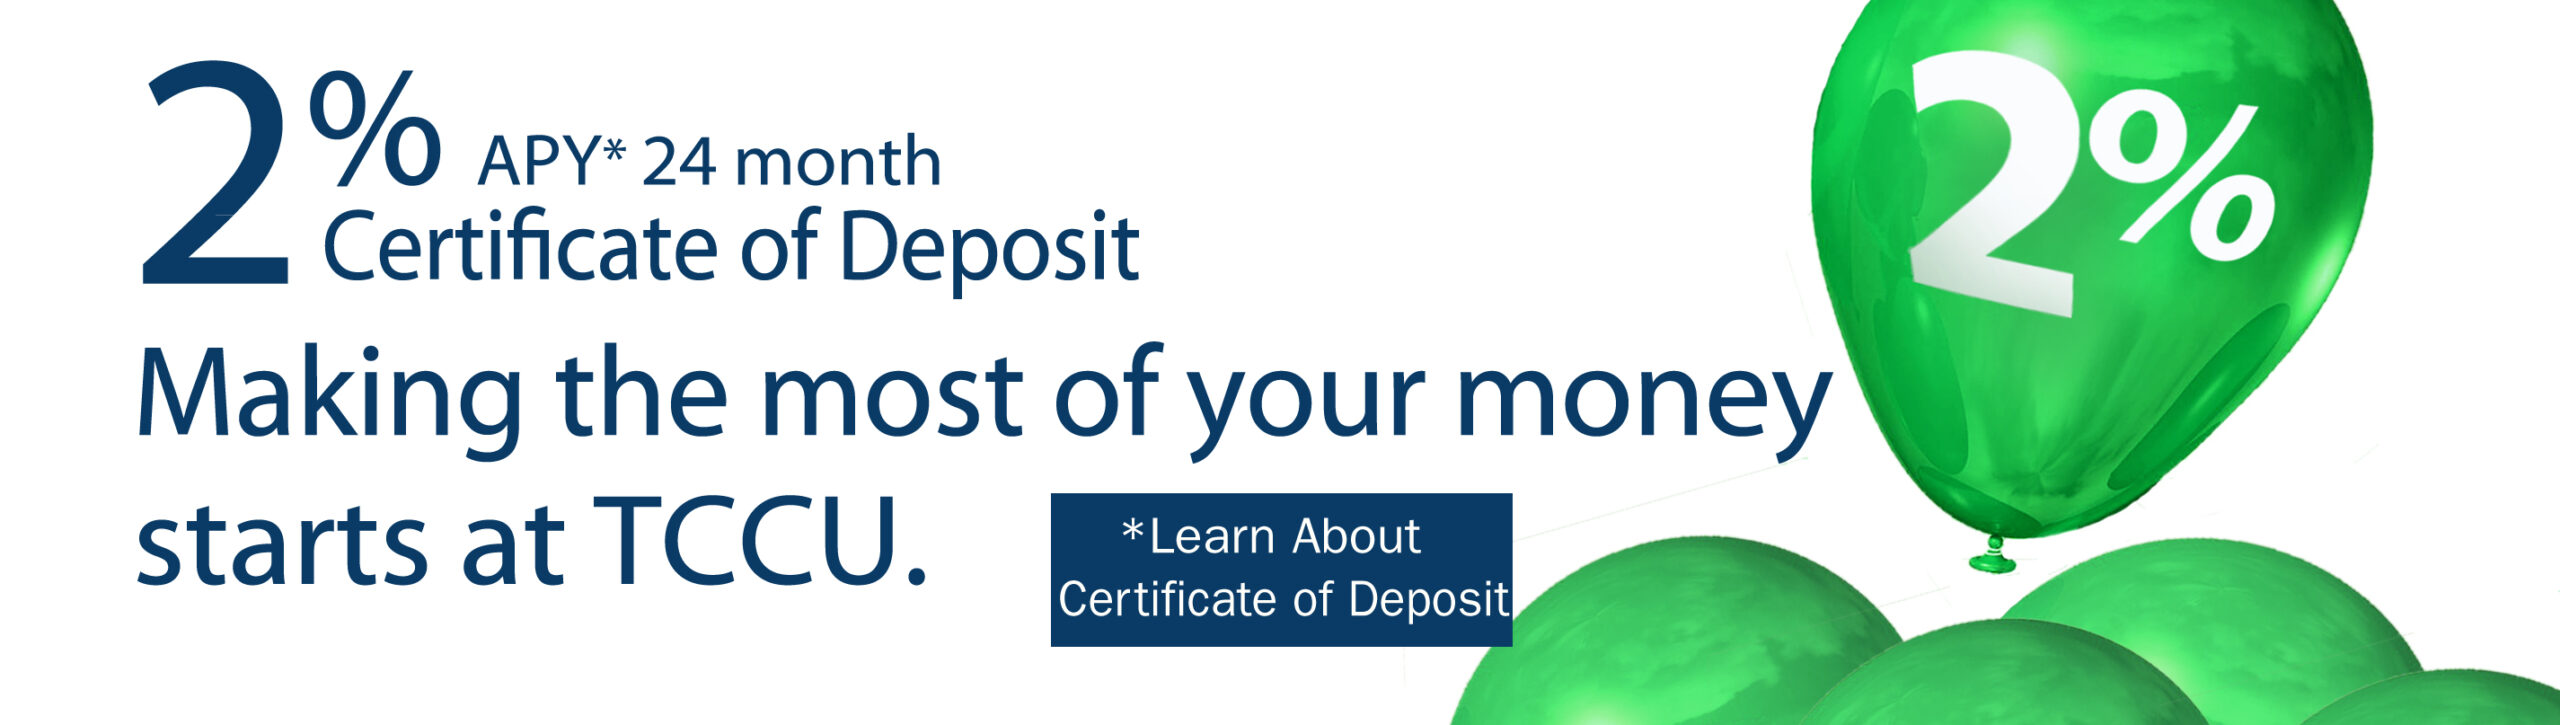 2% APY* 24 month Certificate of Deposit. Making the most of your money starts at TCCU *Learn More about Certificate of Deposit